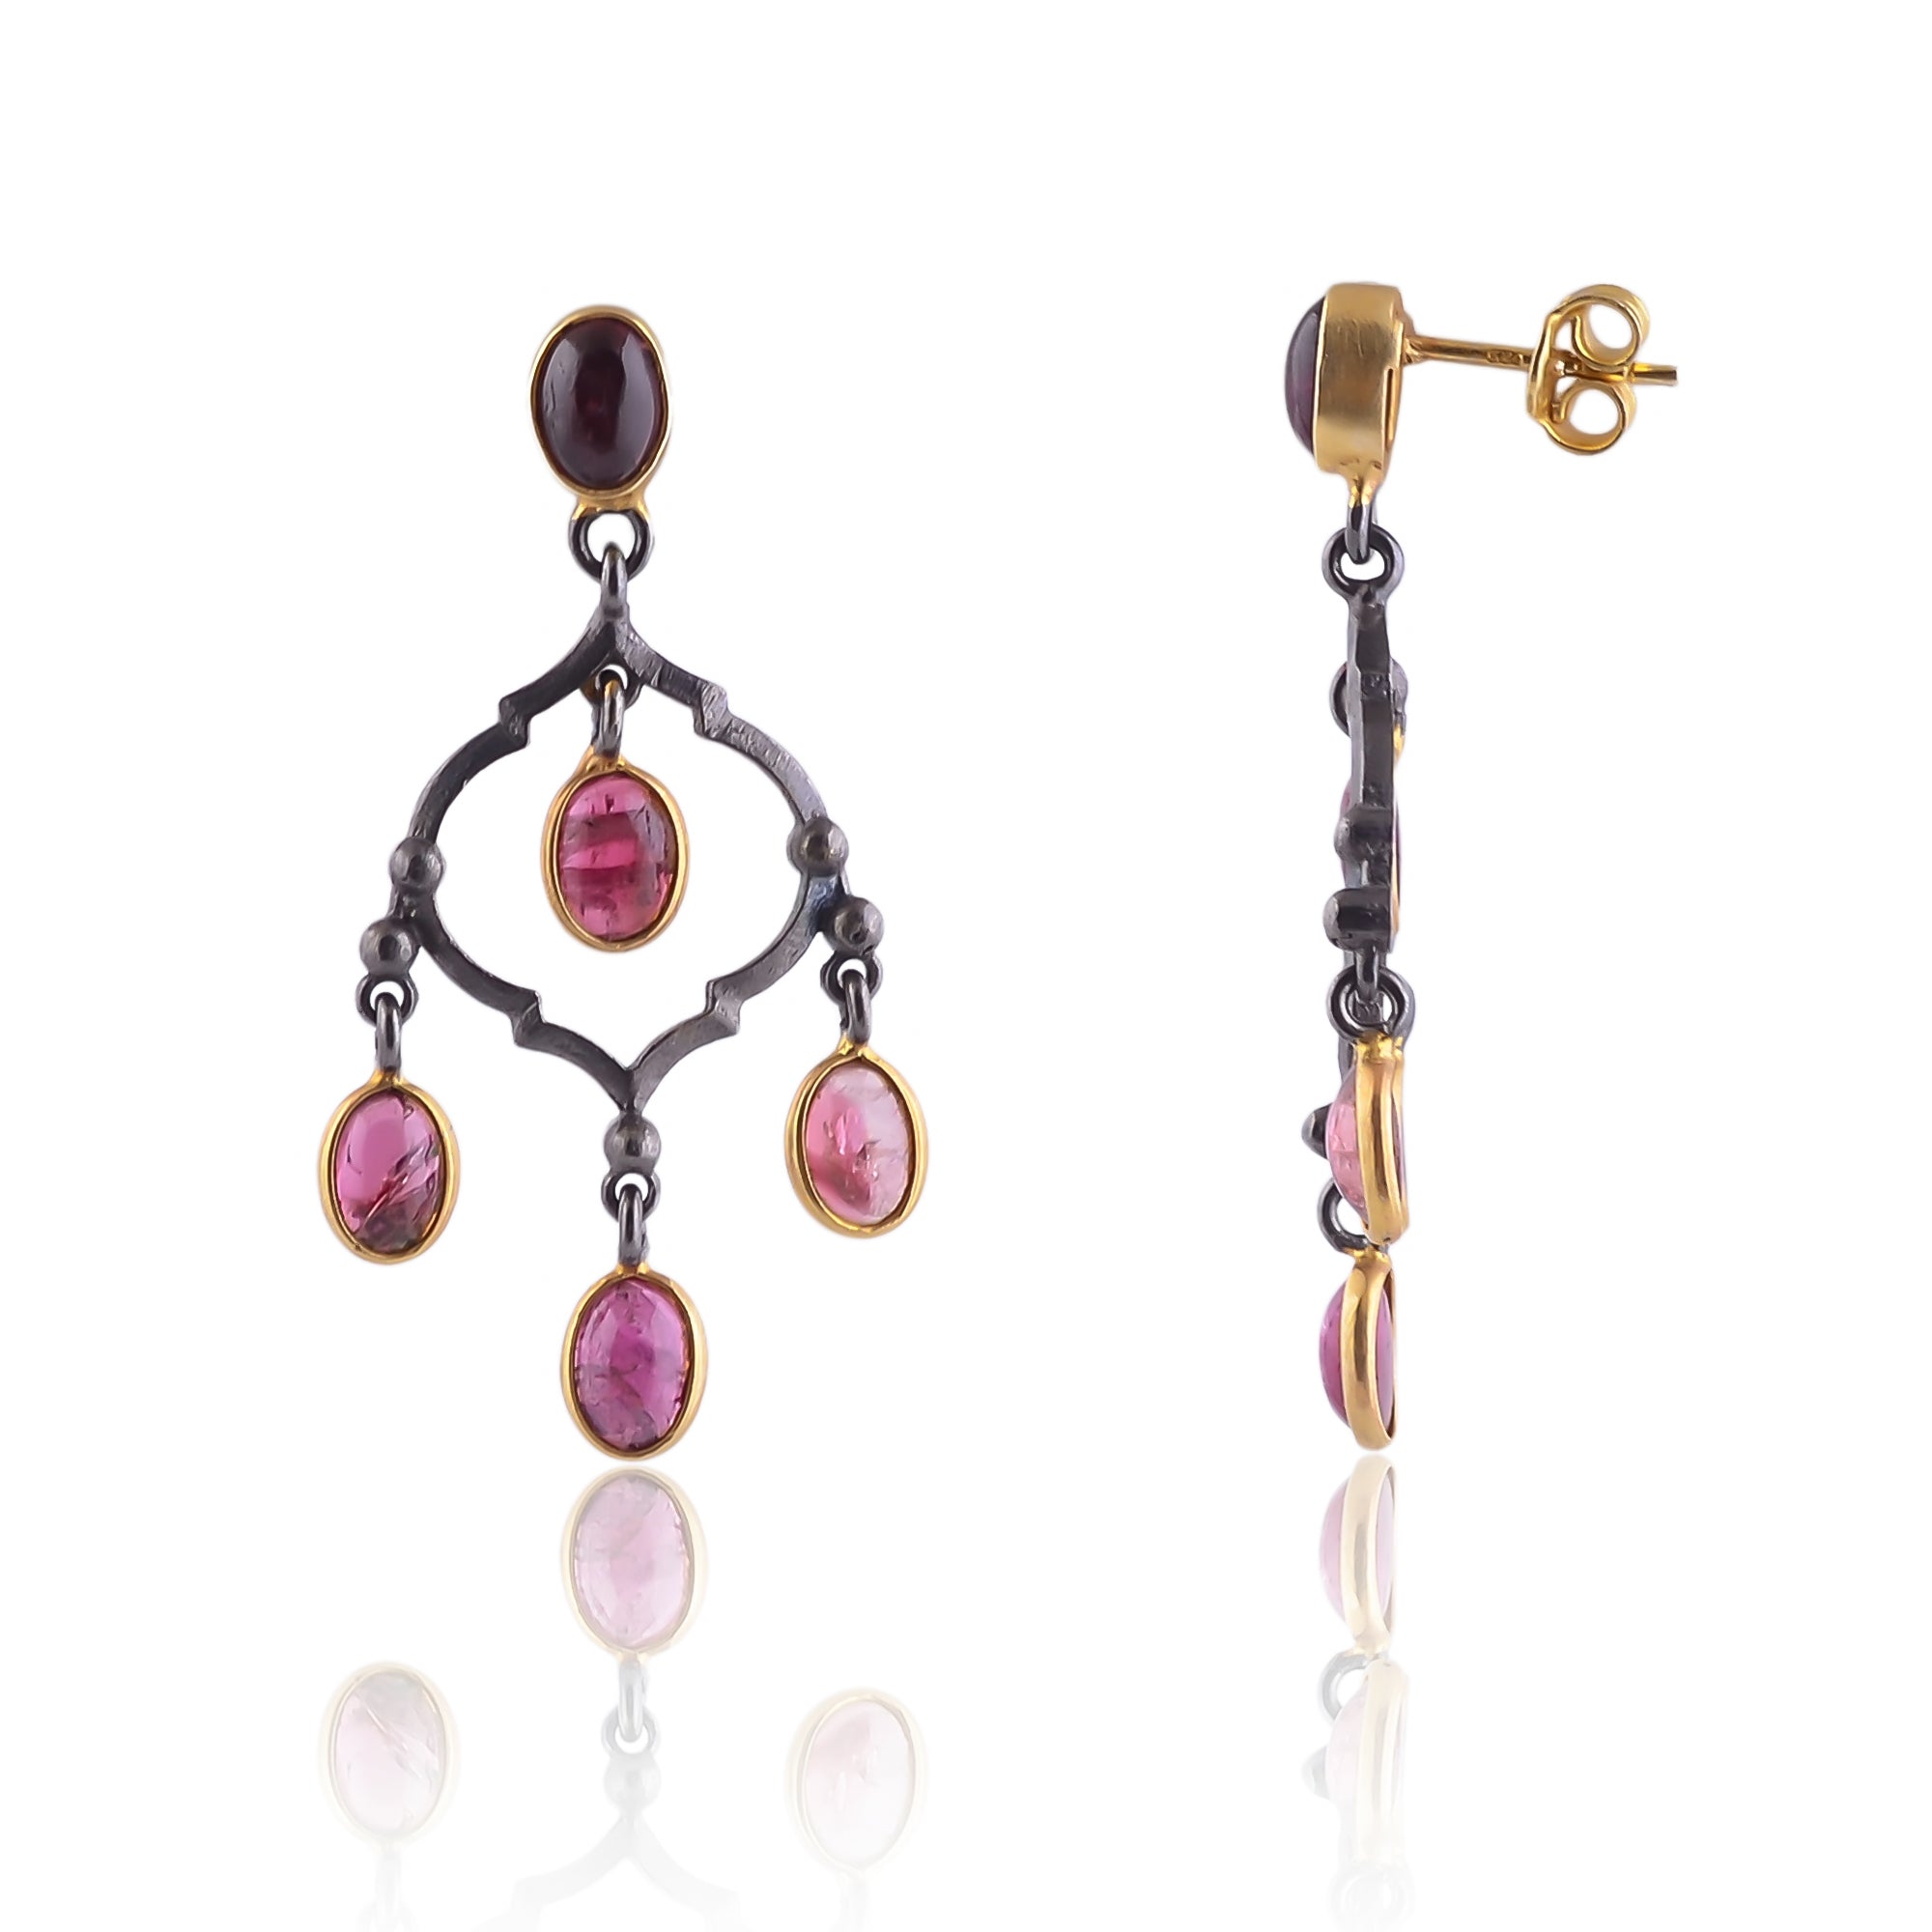 Buy Hand Crafted Silver Gold Black Plated Tourmaline Mughal Earring